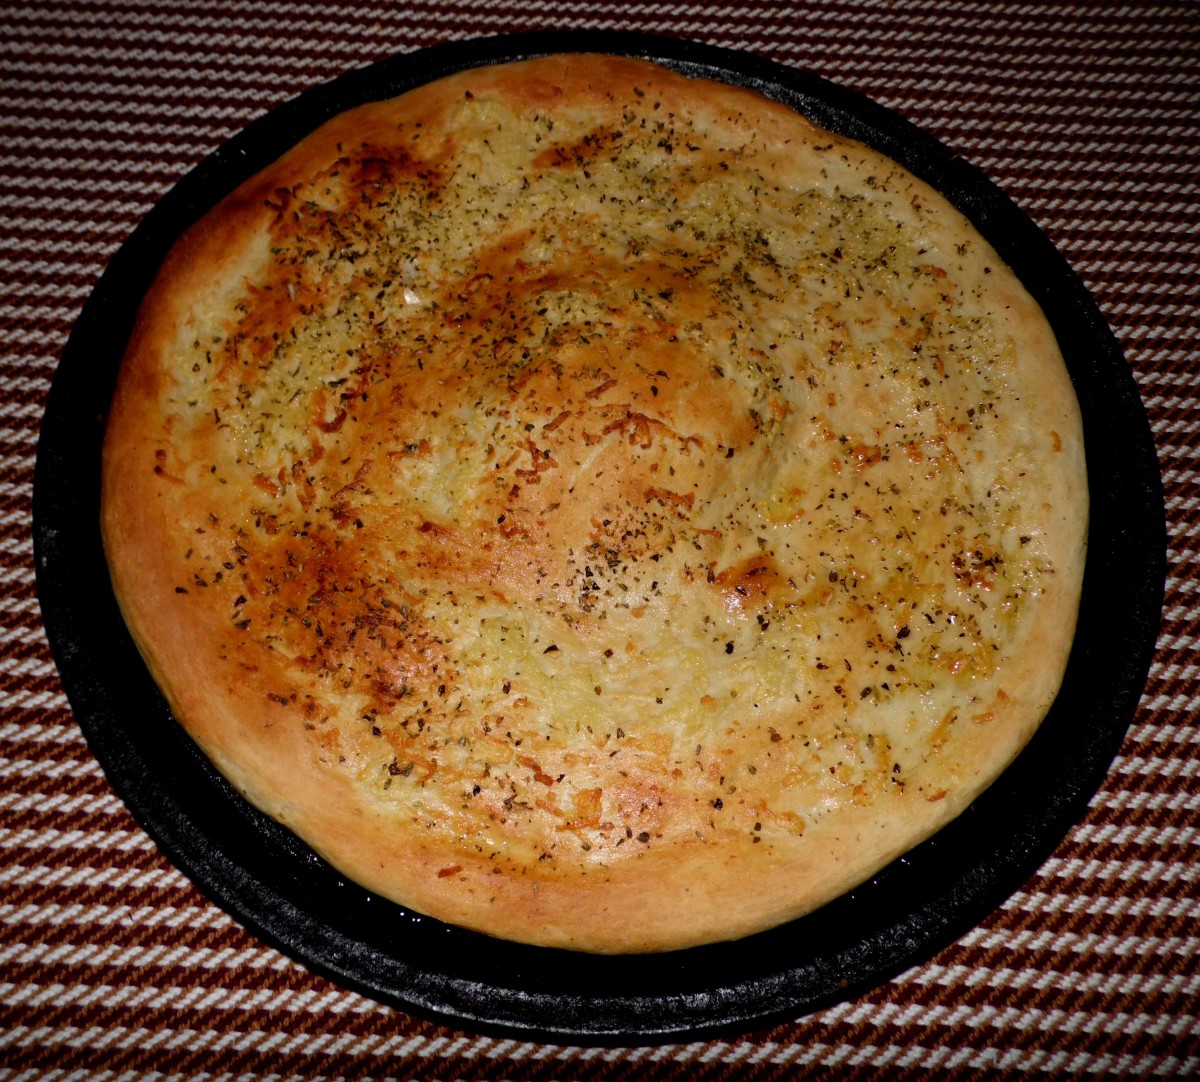 Garlic bread fresh from the oven